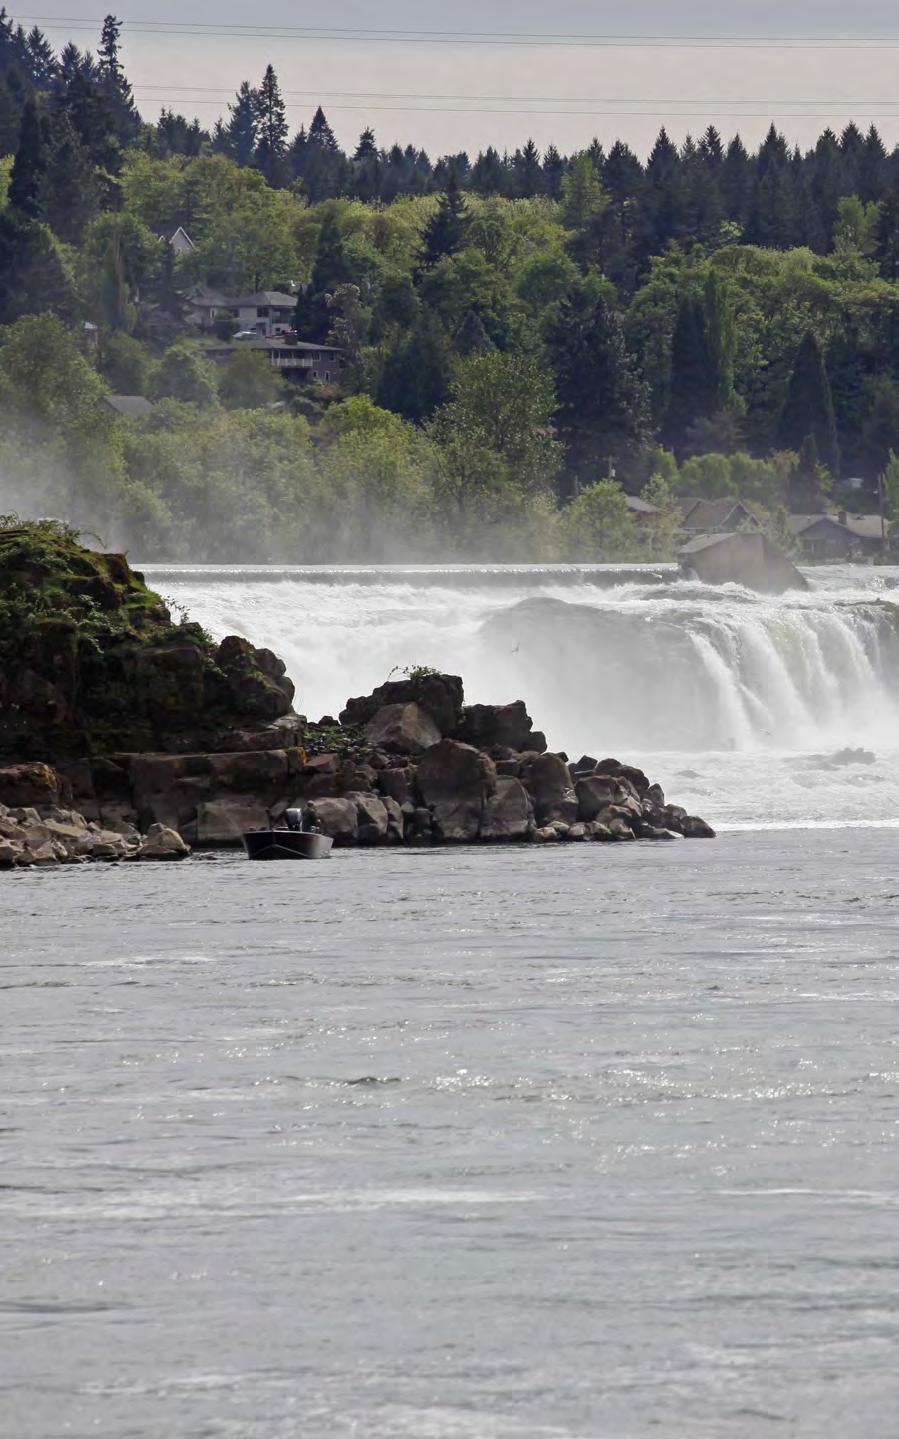 Opportunities + Constraints Analysis for the Willamette Falls Legacy Project The Willamette Falls Legacy Project is an opportunity to establish a vision and framework master plan for the former Blue